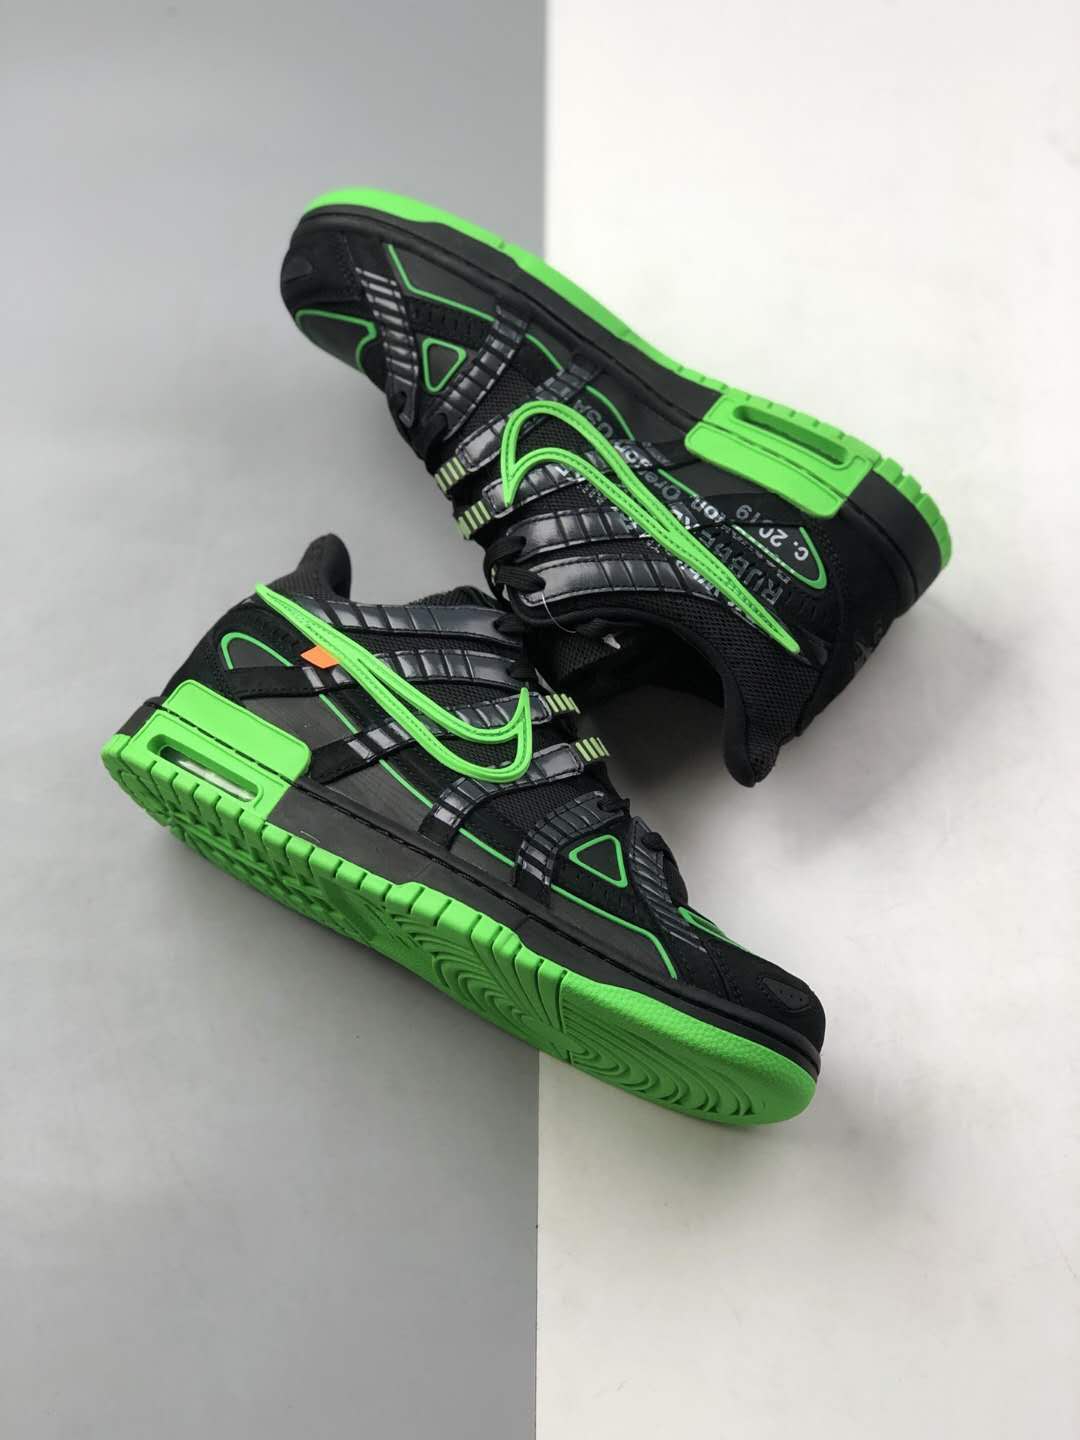 Nike Off-White Air Rubber Dunk 'Green Strike' CU6015-001: Stylish Collaboration with Virgil Abloh